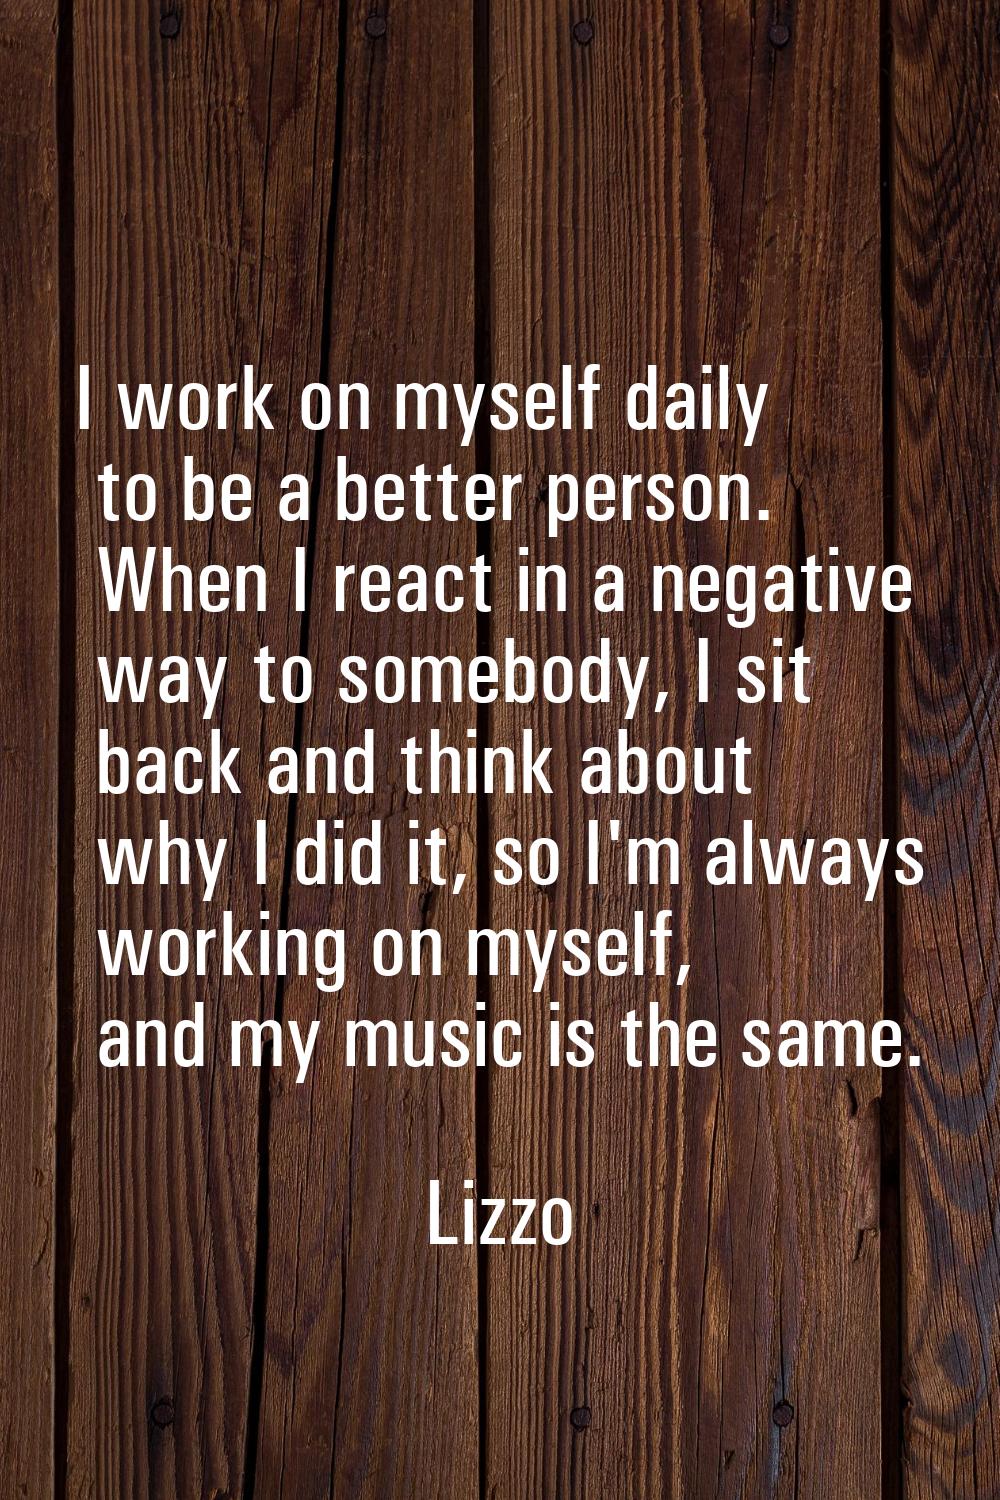 I work on myself daily to be a better person. When I react in a negative way to somebody, I sit bac